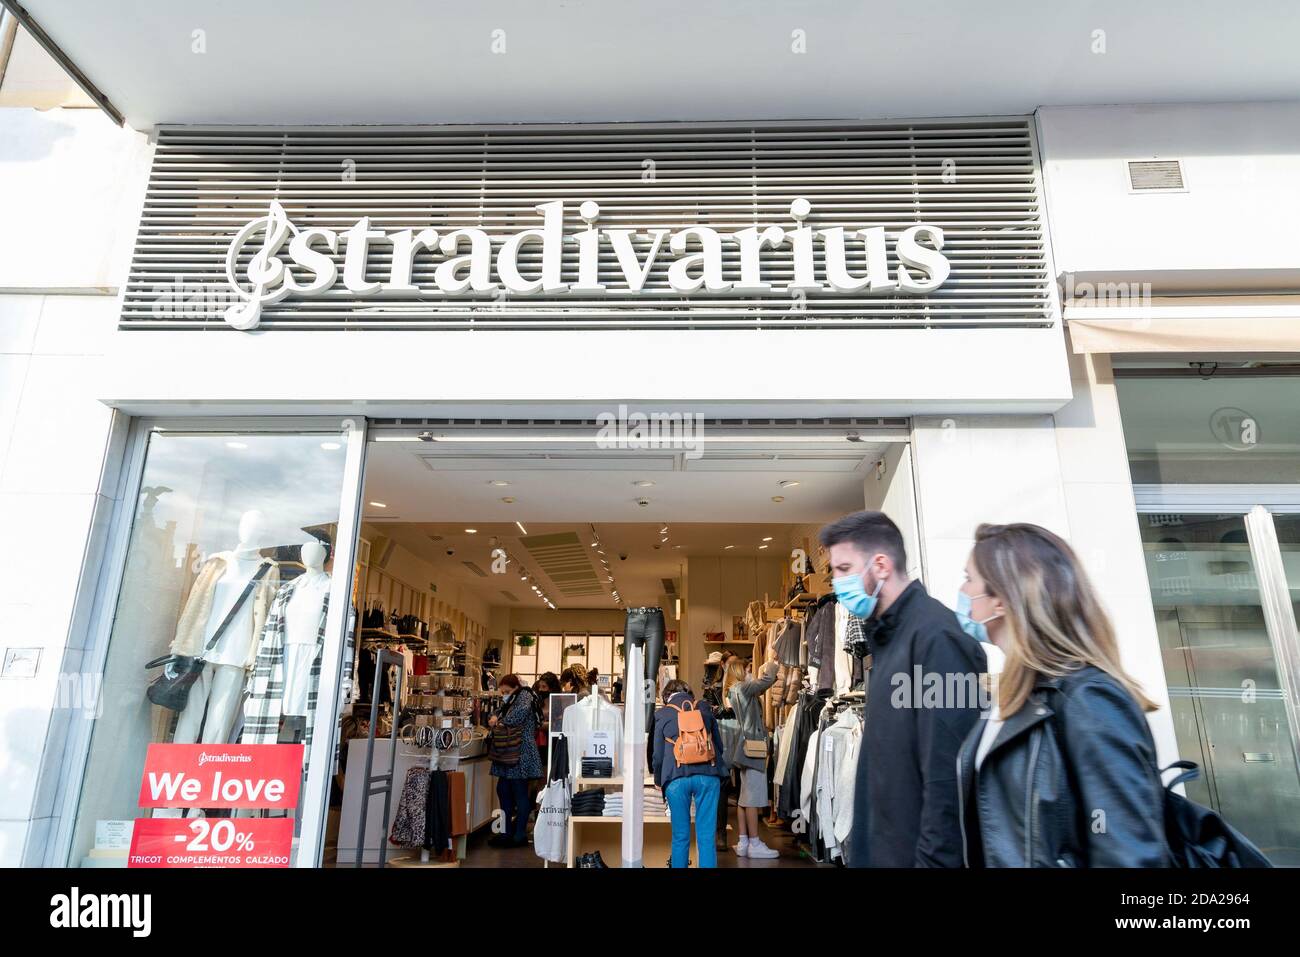 Stradivarius Clothing High Resolution Stock Photography and Images - Alamy